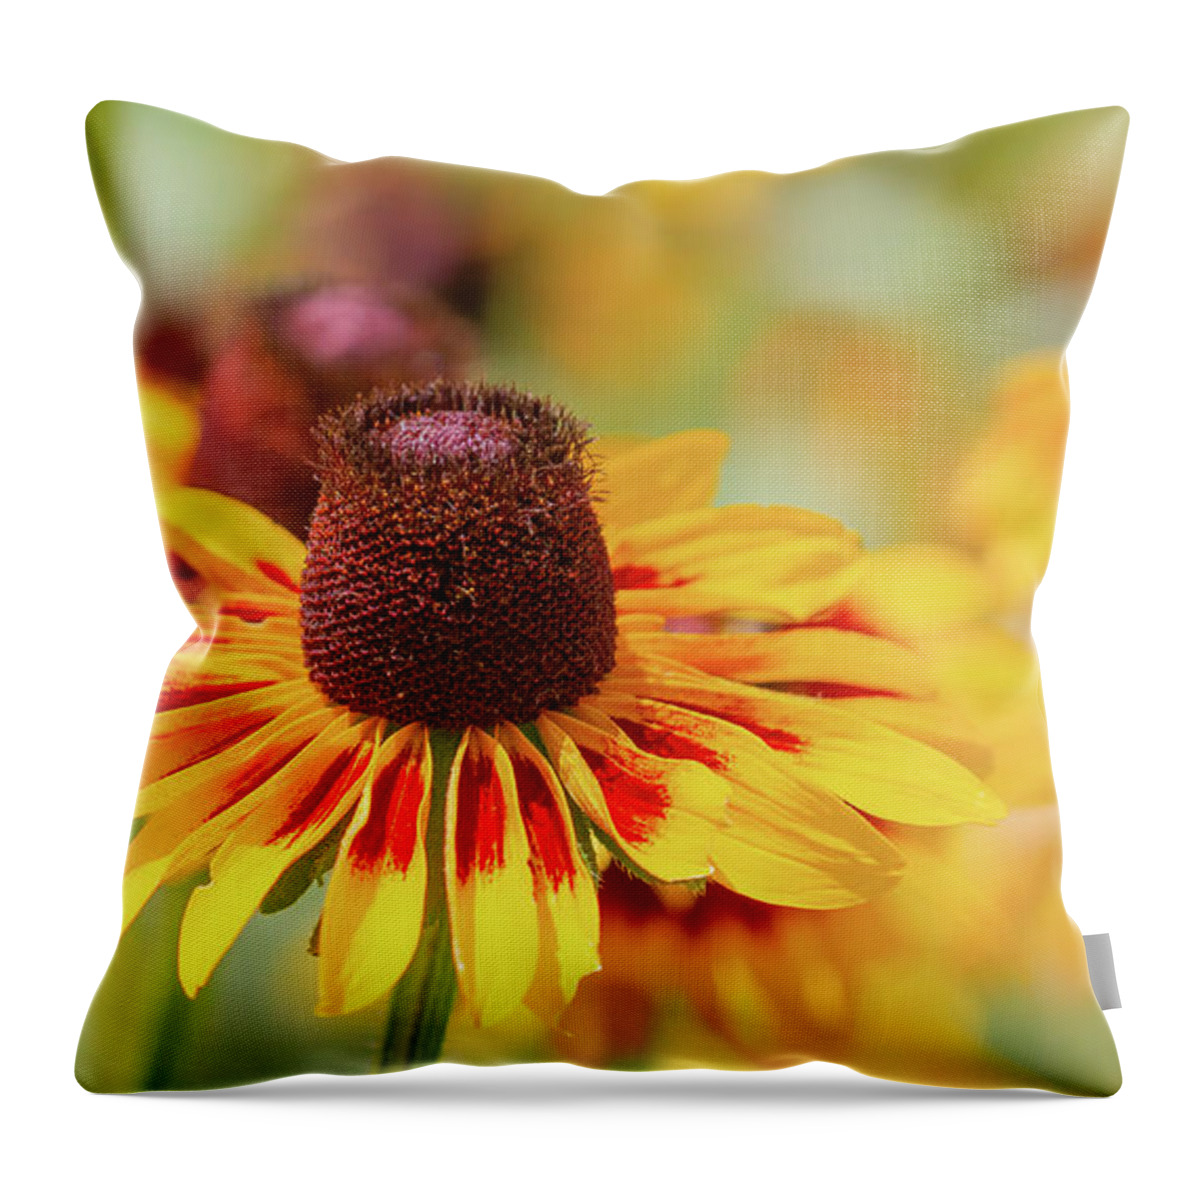 Flowers Throw Pillow featuring the photograph Black-eyed Susans #1 by Chris Scroggins